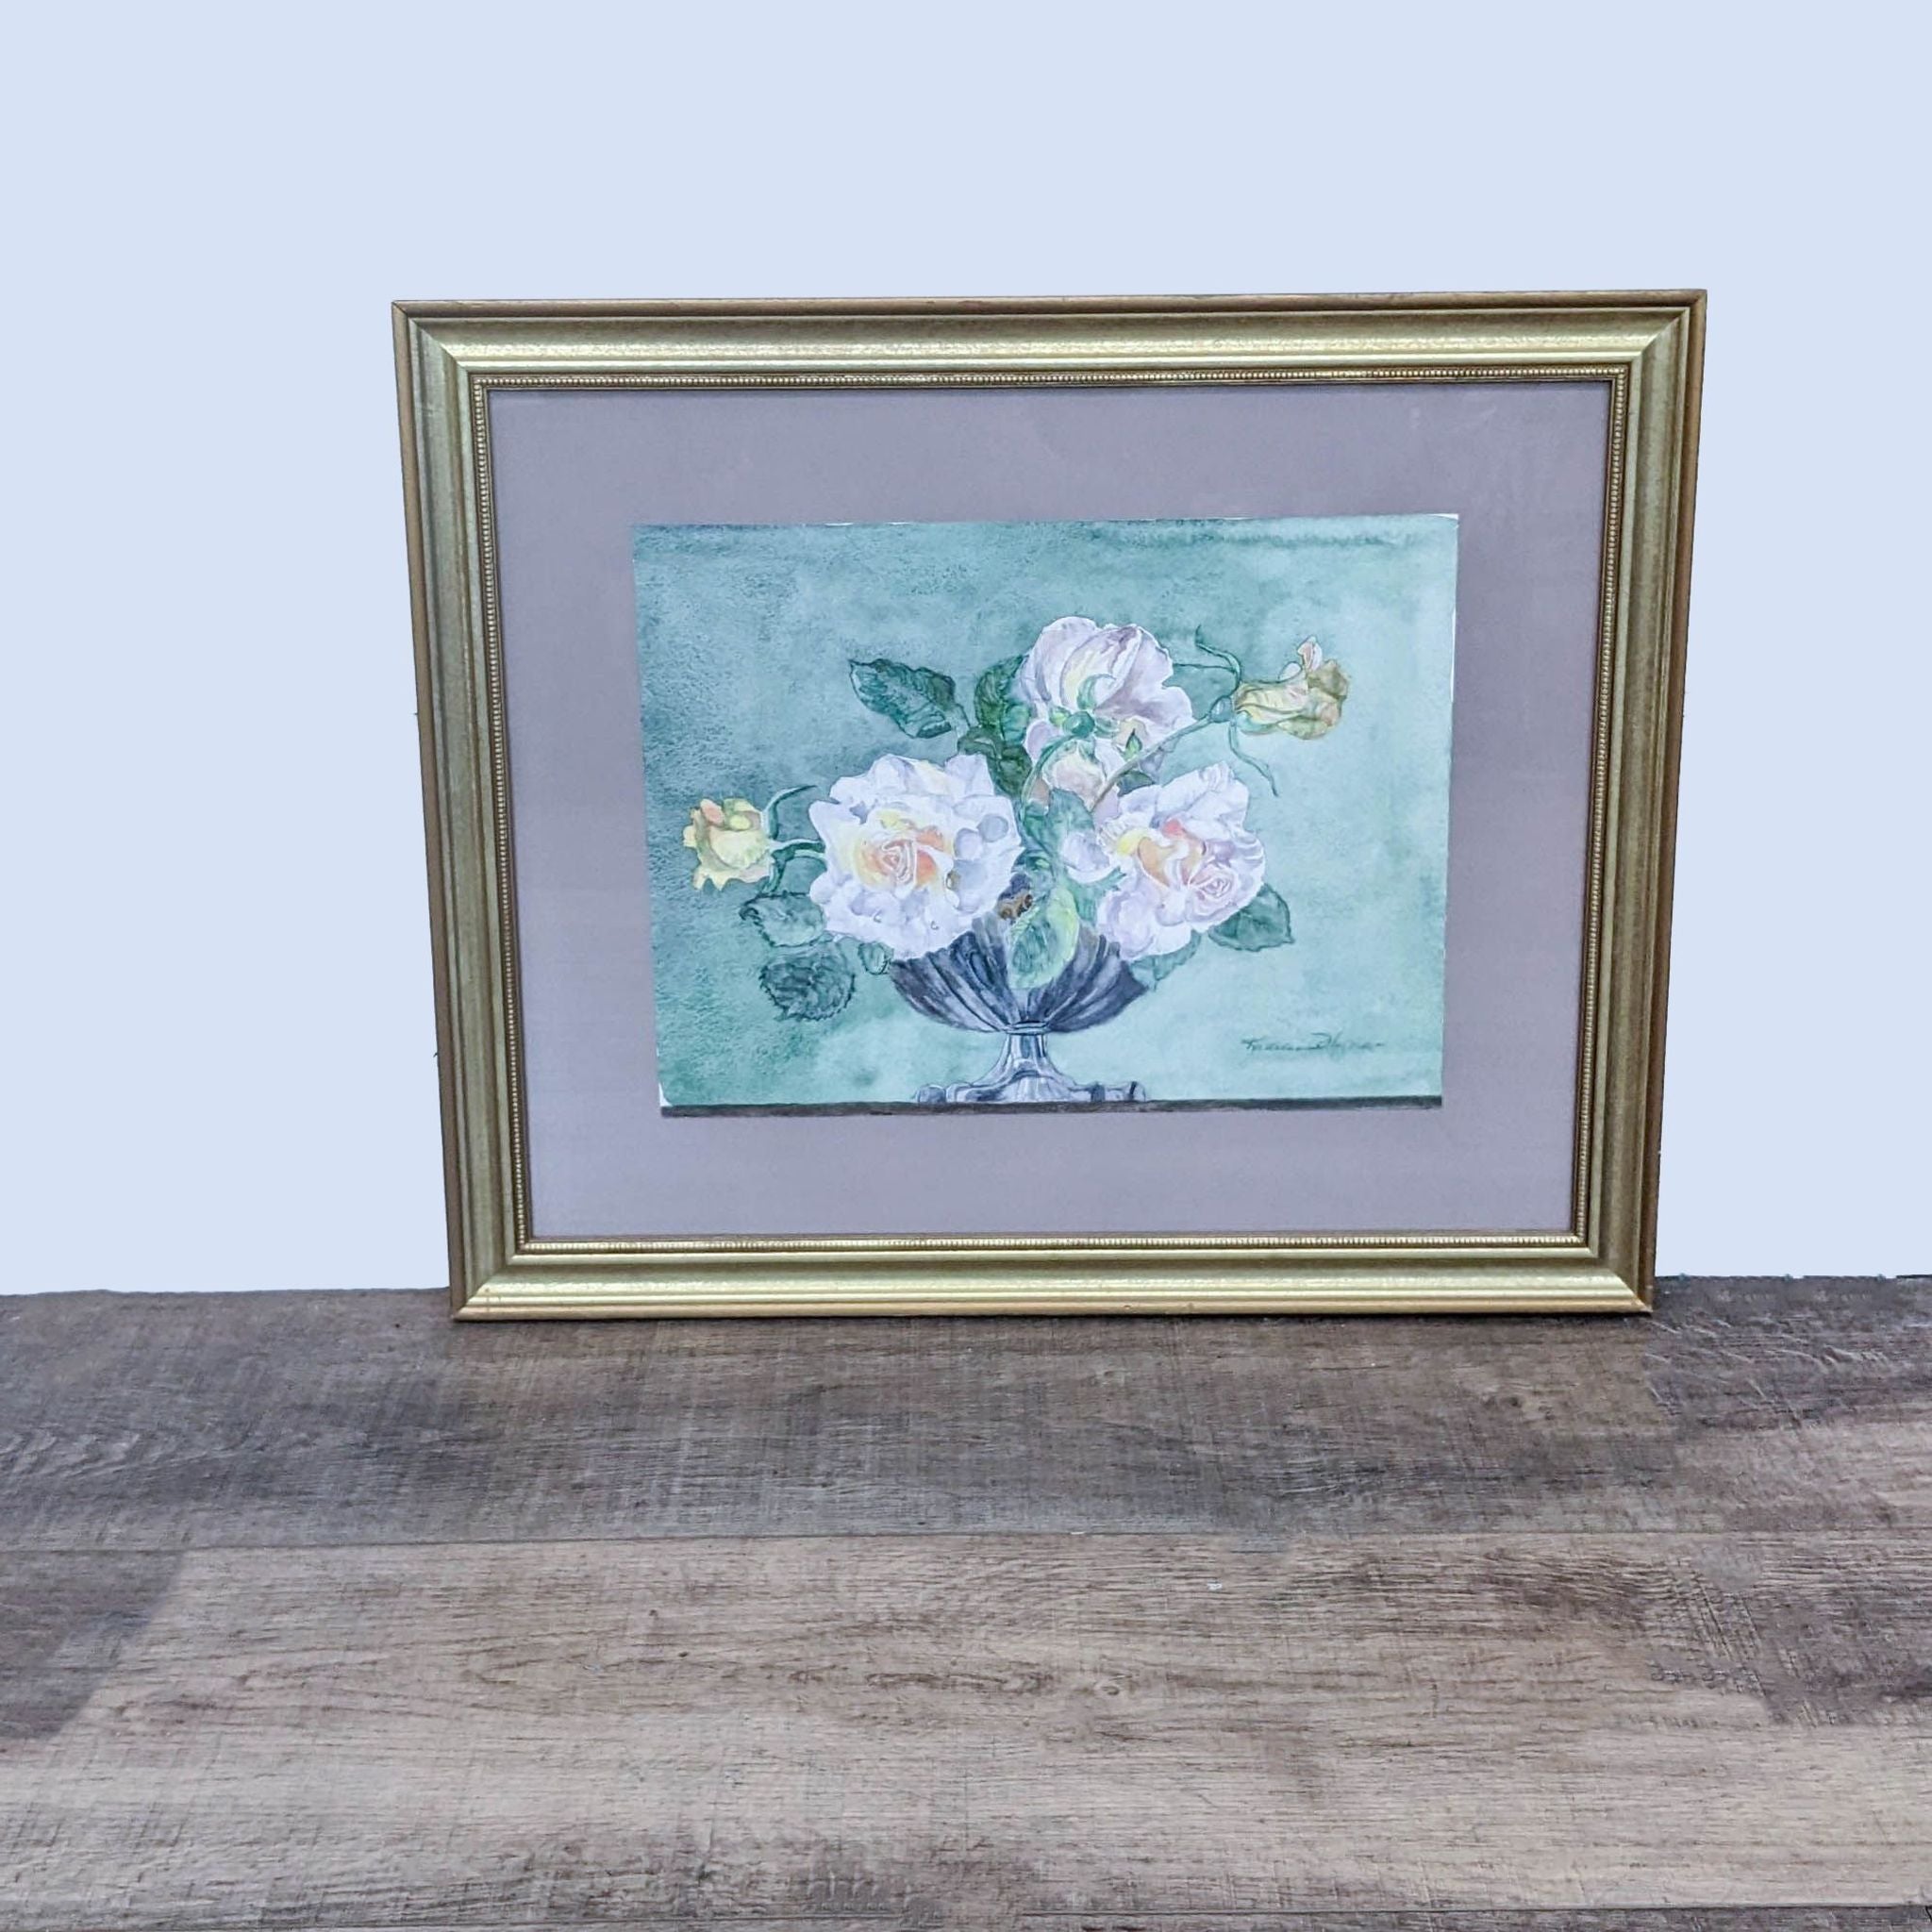 Alt text 1: Reperch brand framed watercolor painting by Kathleen Hynes, depicting soft pastel floral arrangement, displayed on a wooden surface.